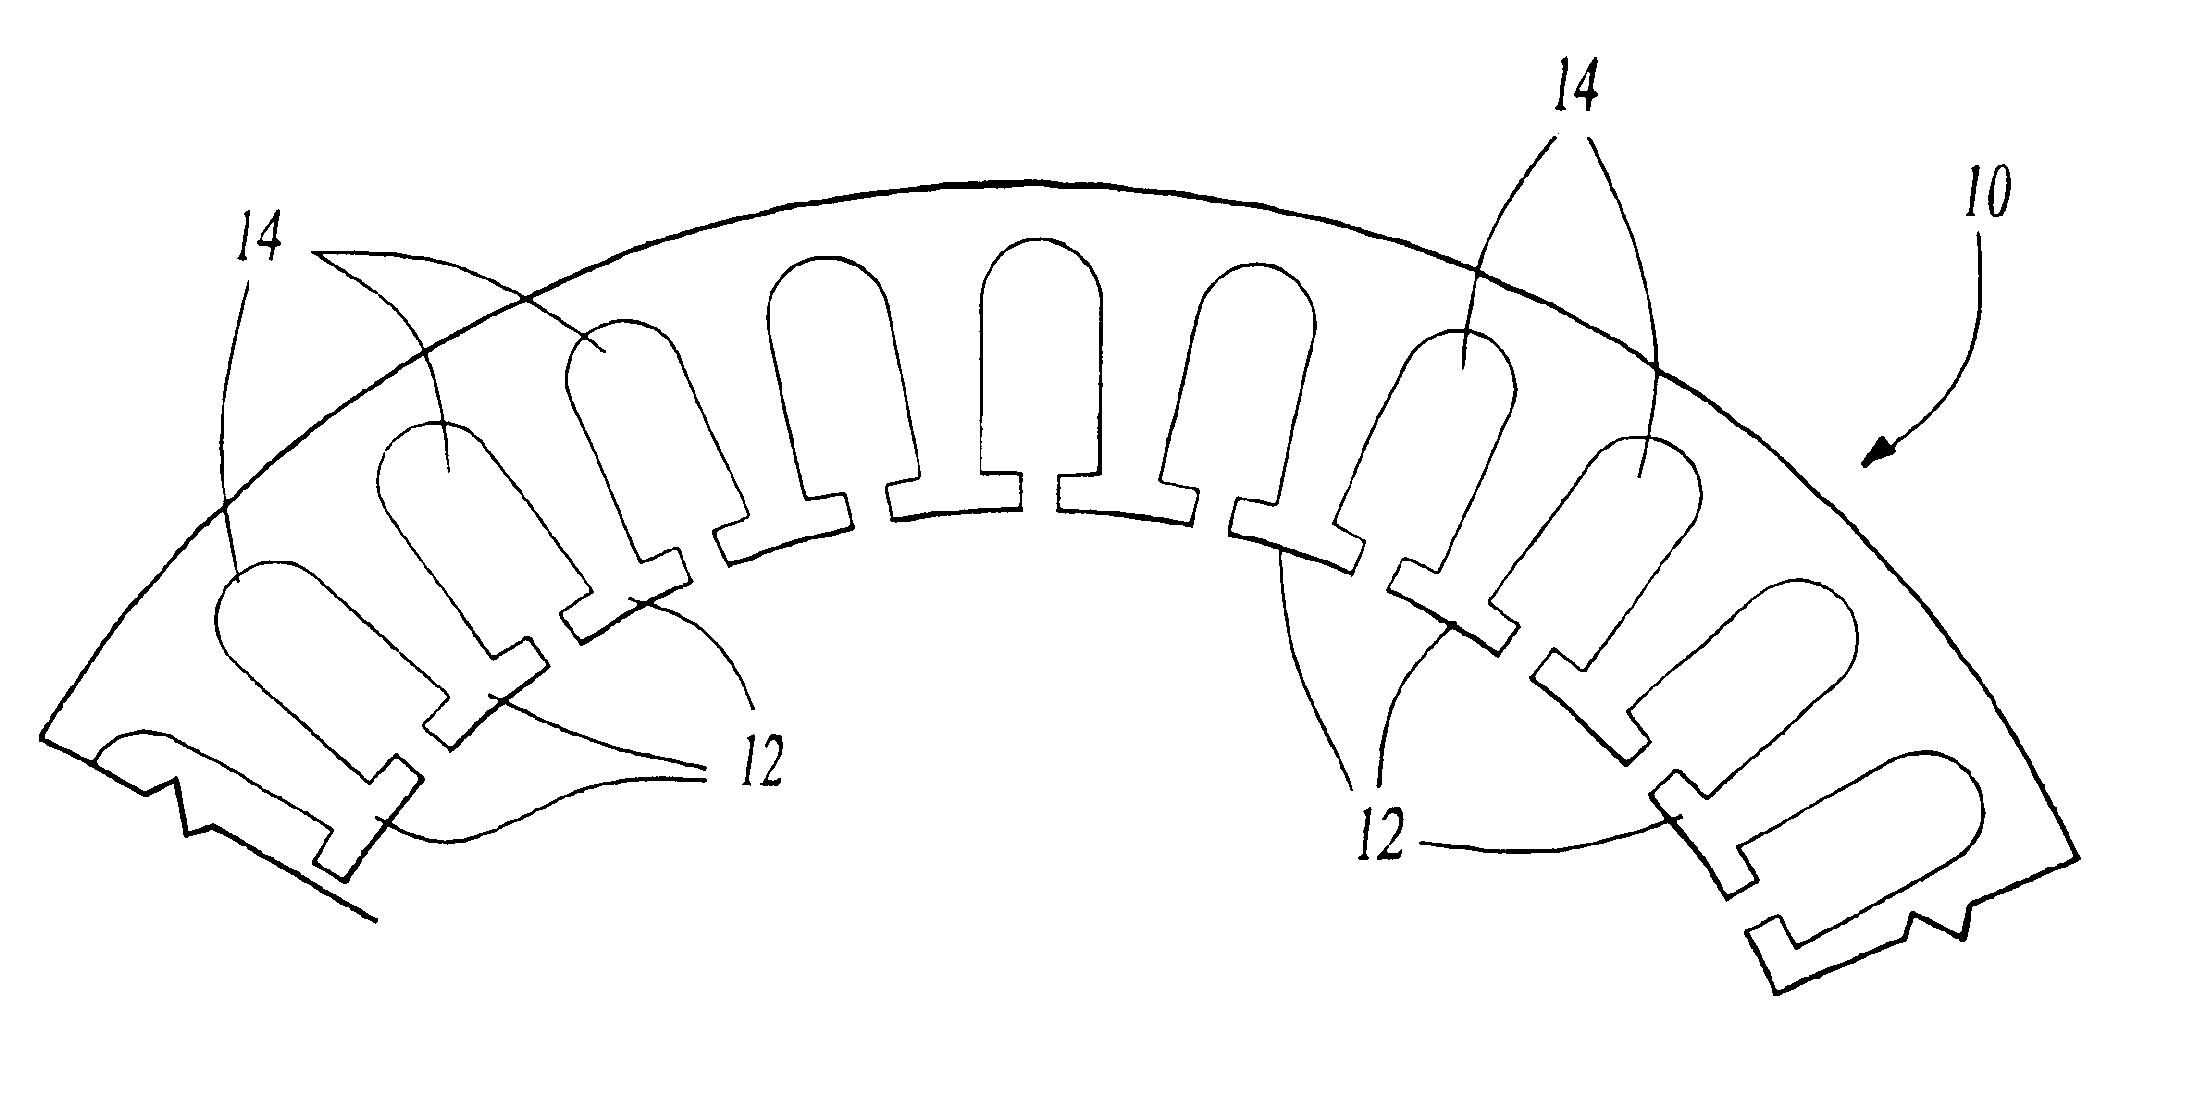 Stator winding pattern for reduced magnetic noise